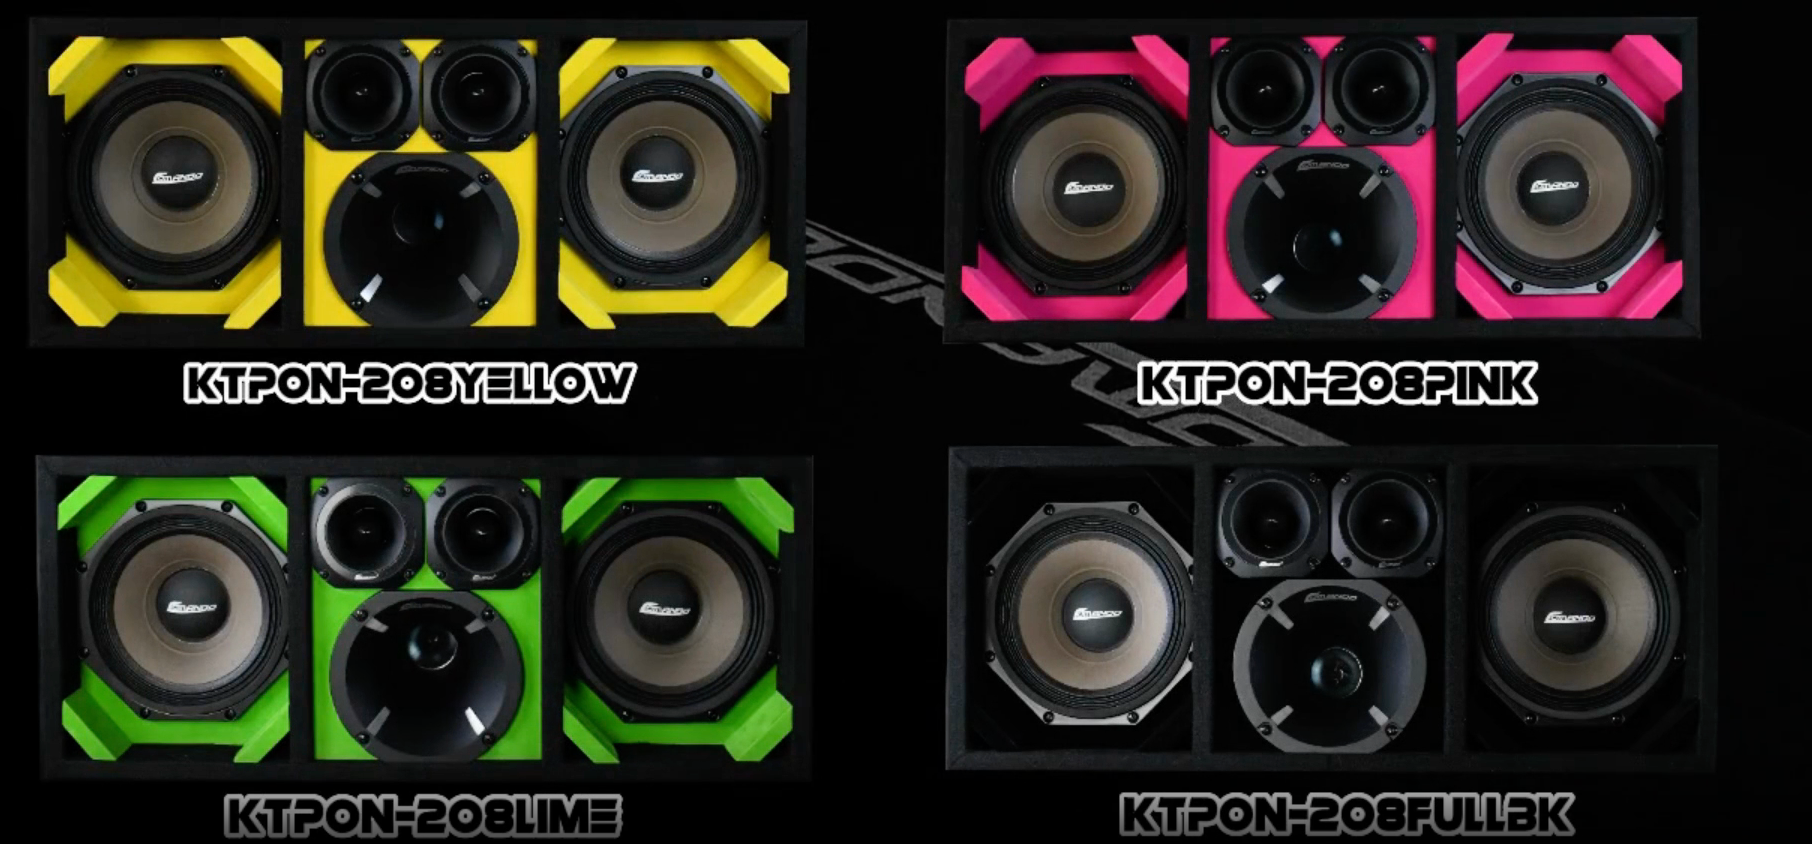 Load video: Introducing our new KITIPON / CHUCHEROS pre-built boxes.